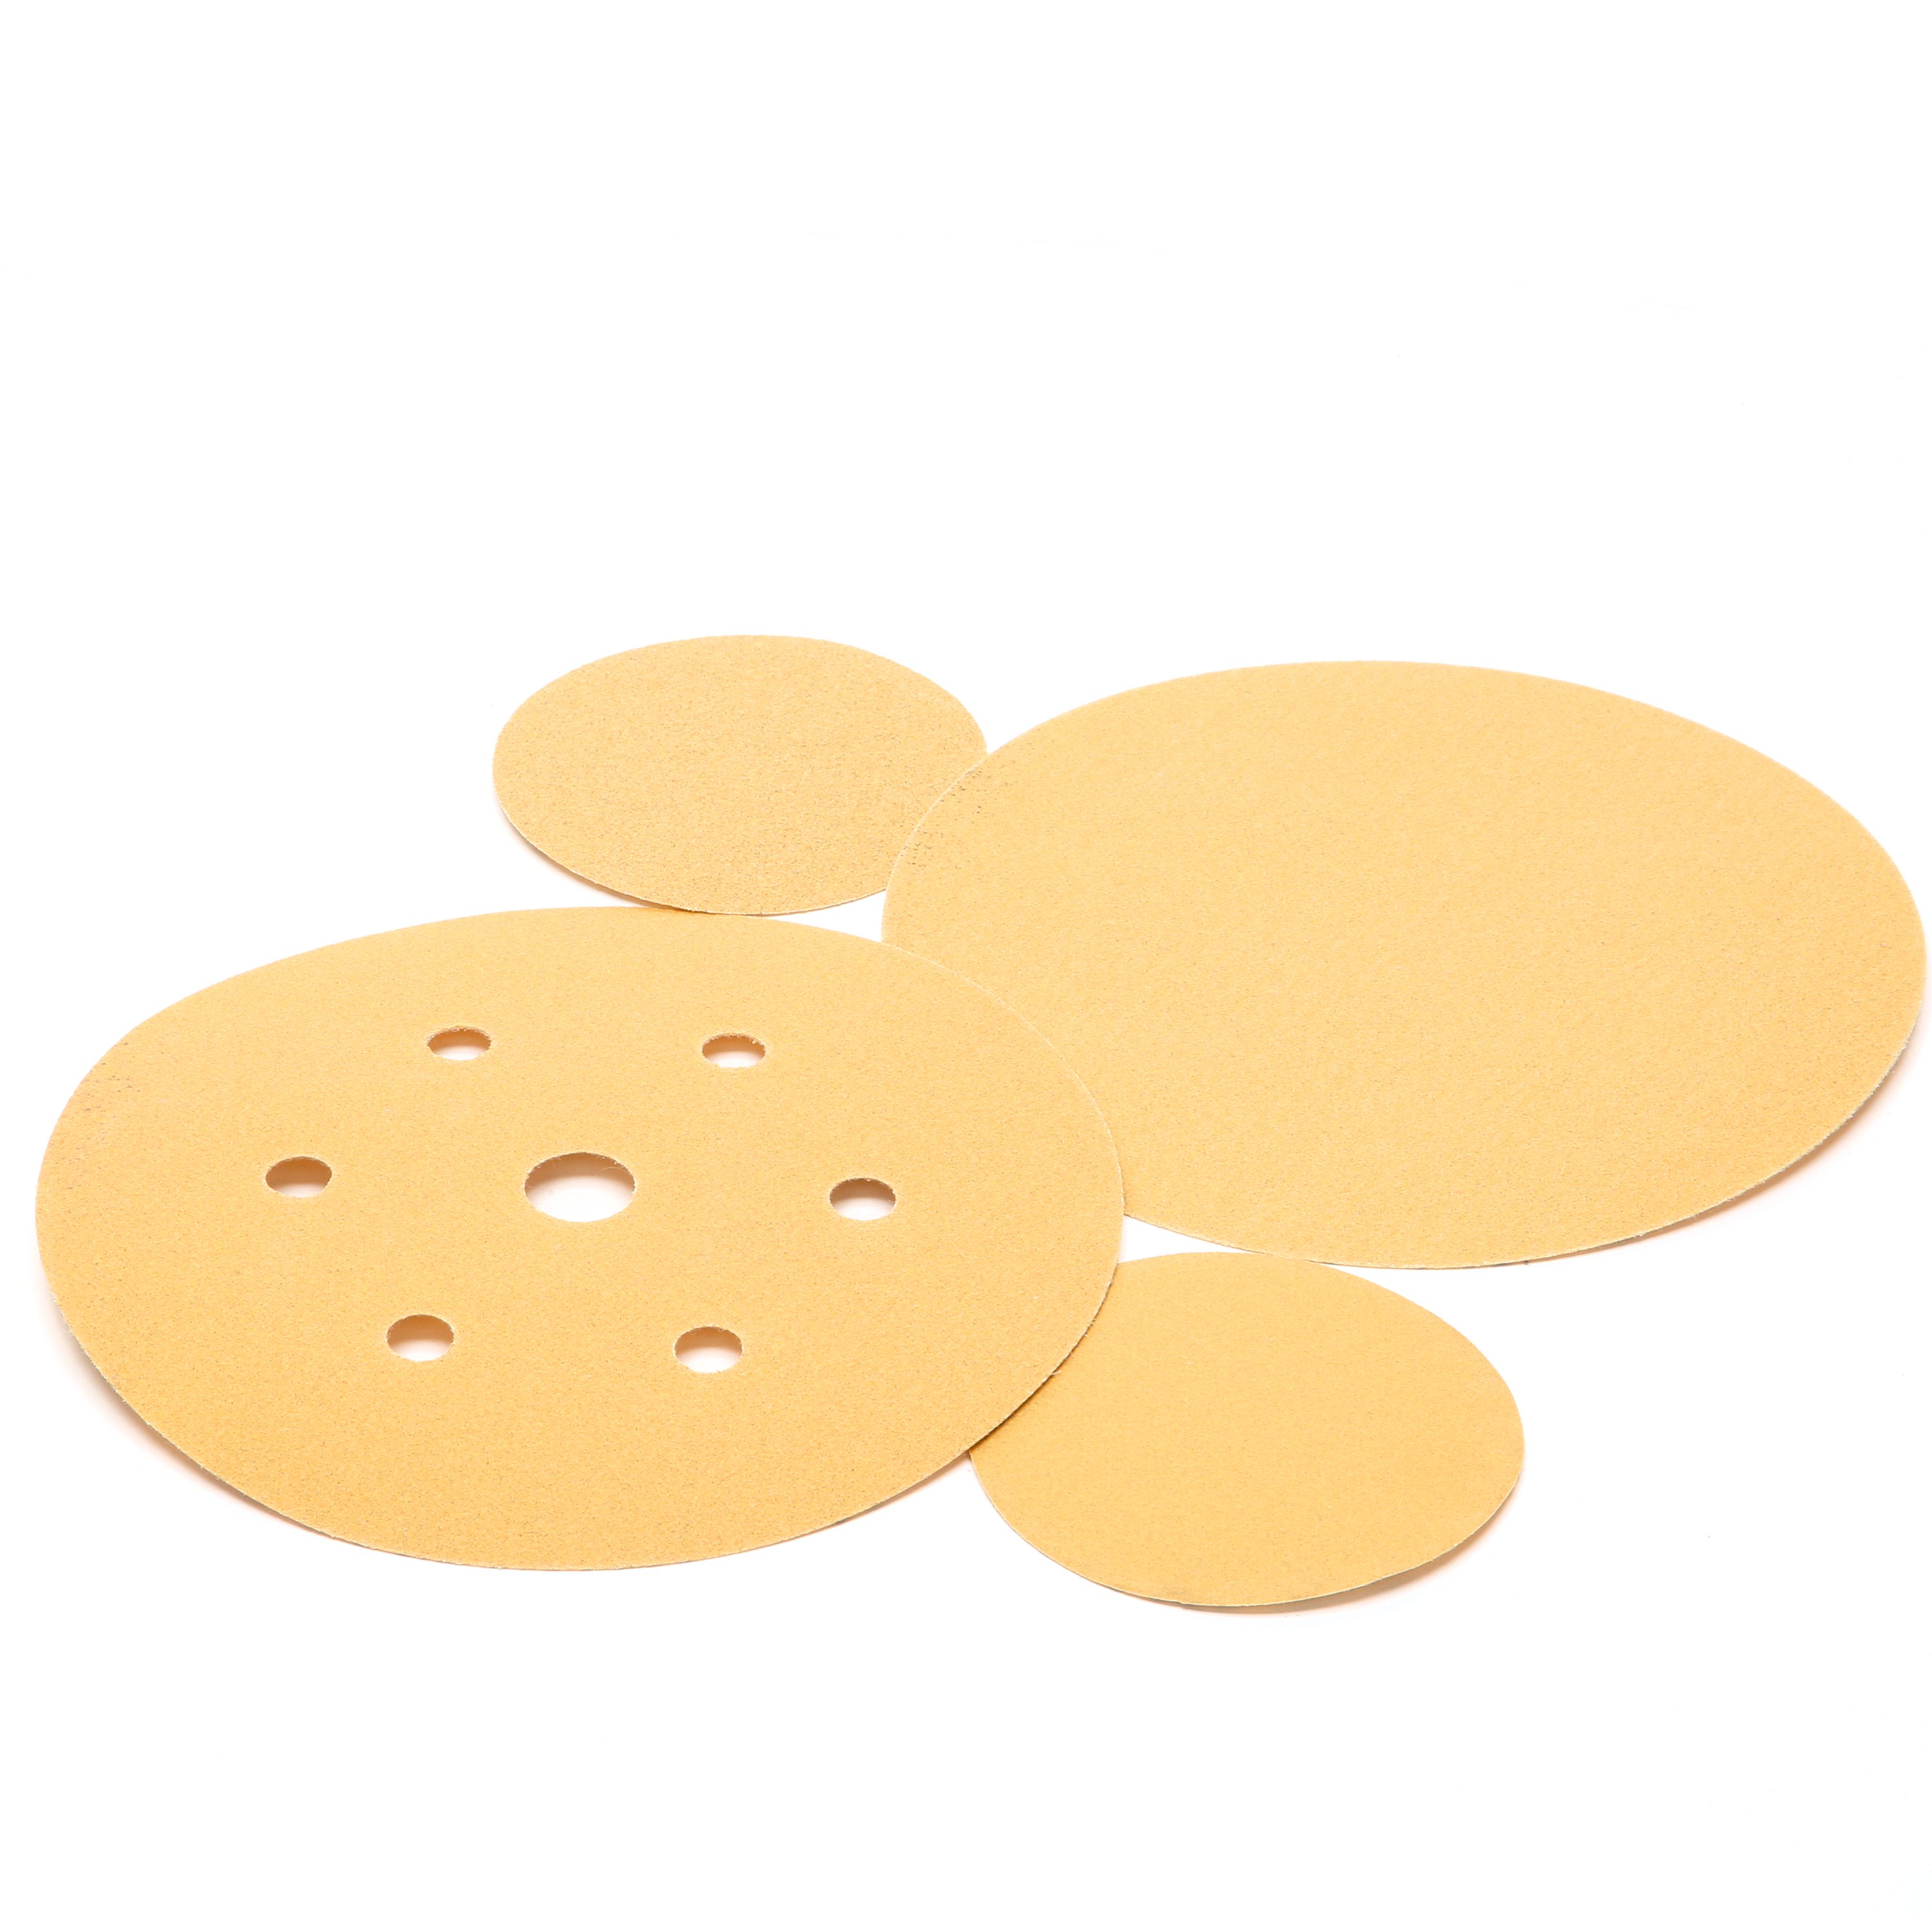 A grade range from P80 to P180 along with durable C-weight paper backing make 3M™ Hookit™ Gold Disc 236U ideal for auto body sanding projects including rough feather-edging, scratch refinement on bare metal, paint removal around damaged areas and more